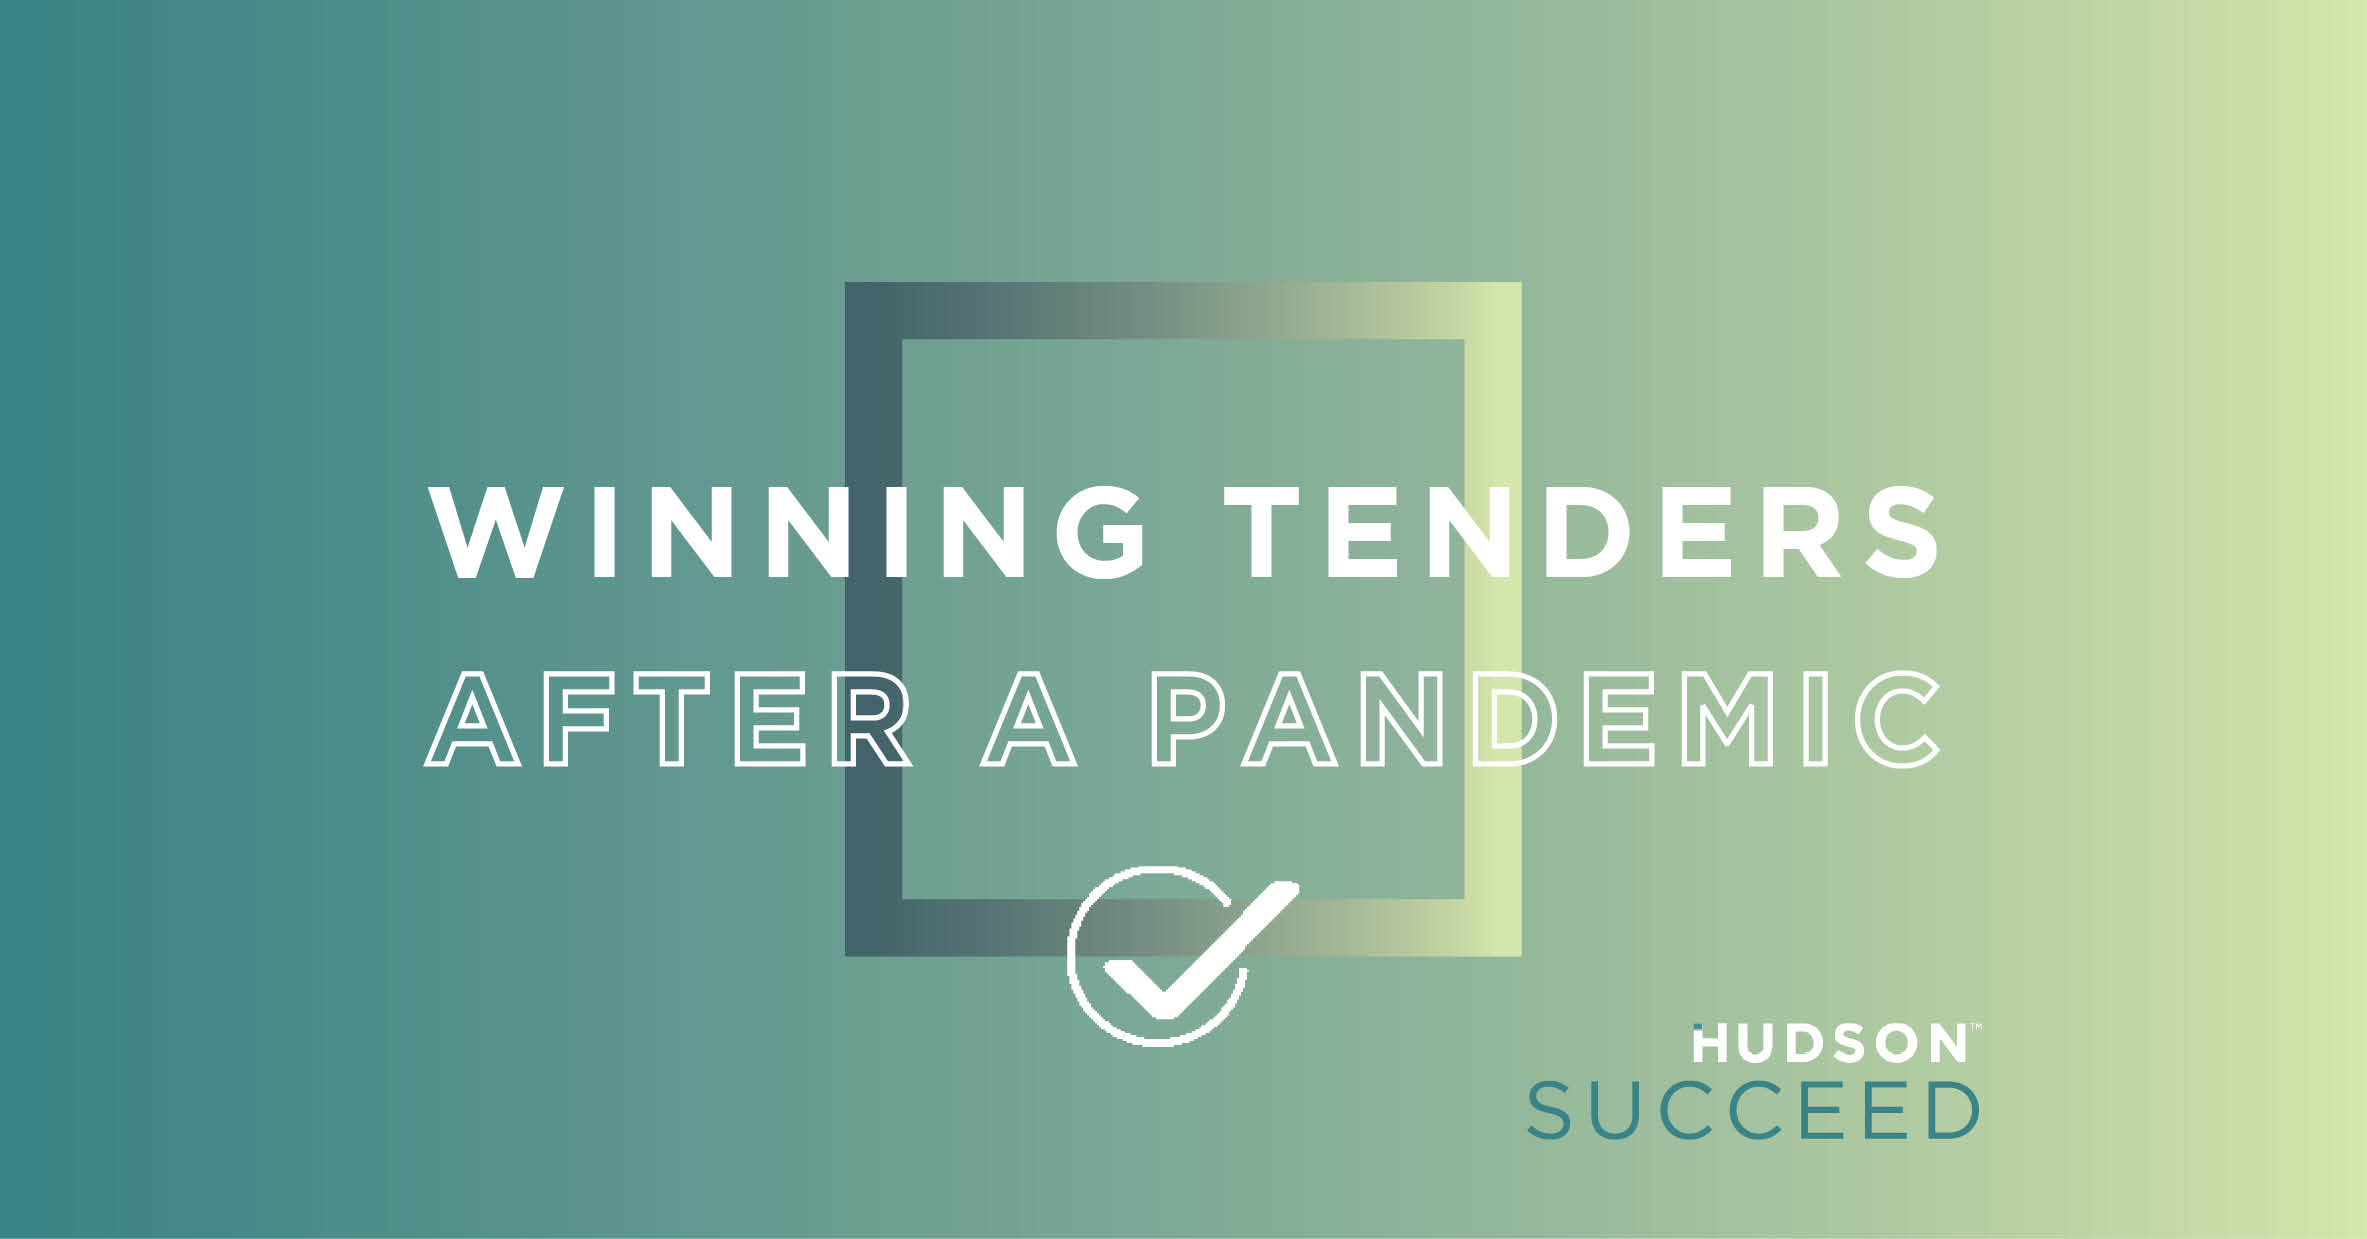 How to Win Public Sector Tenders After a Pandemic